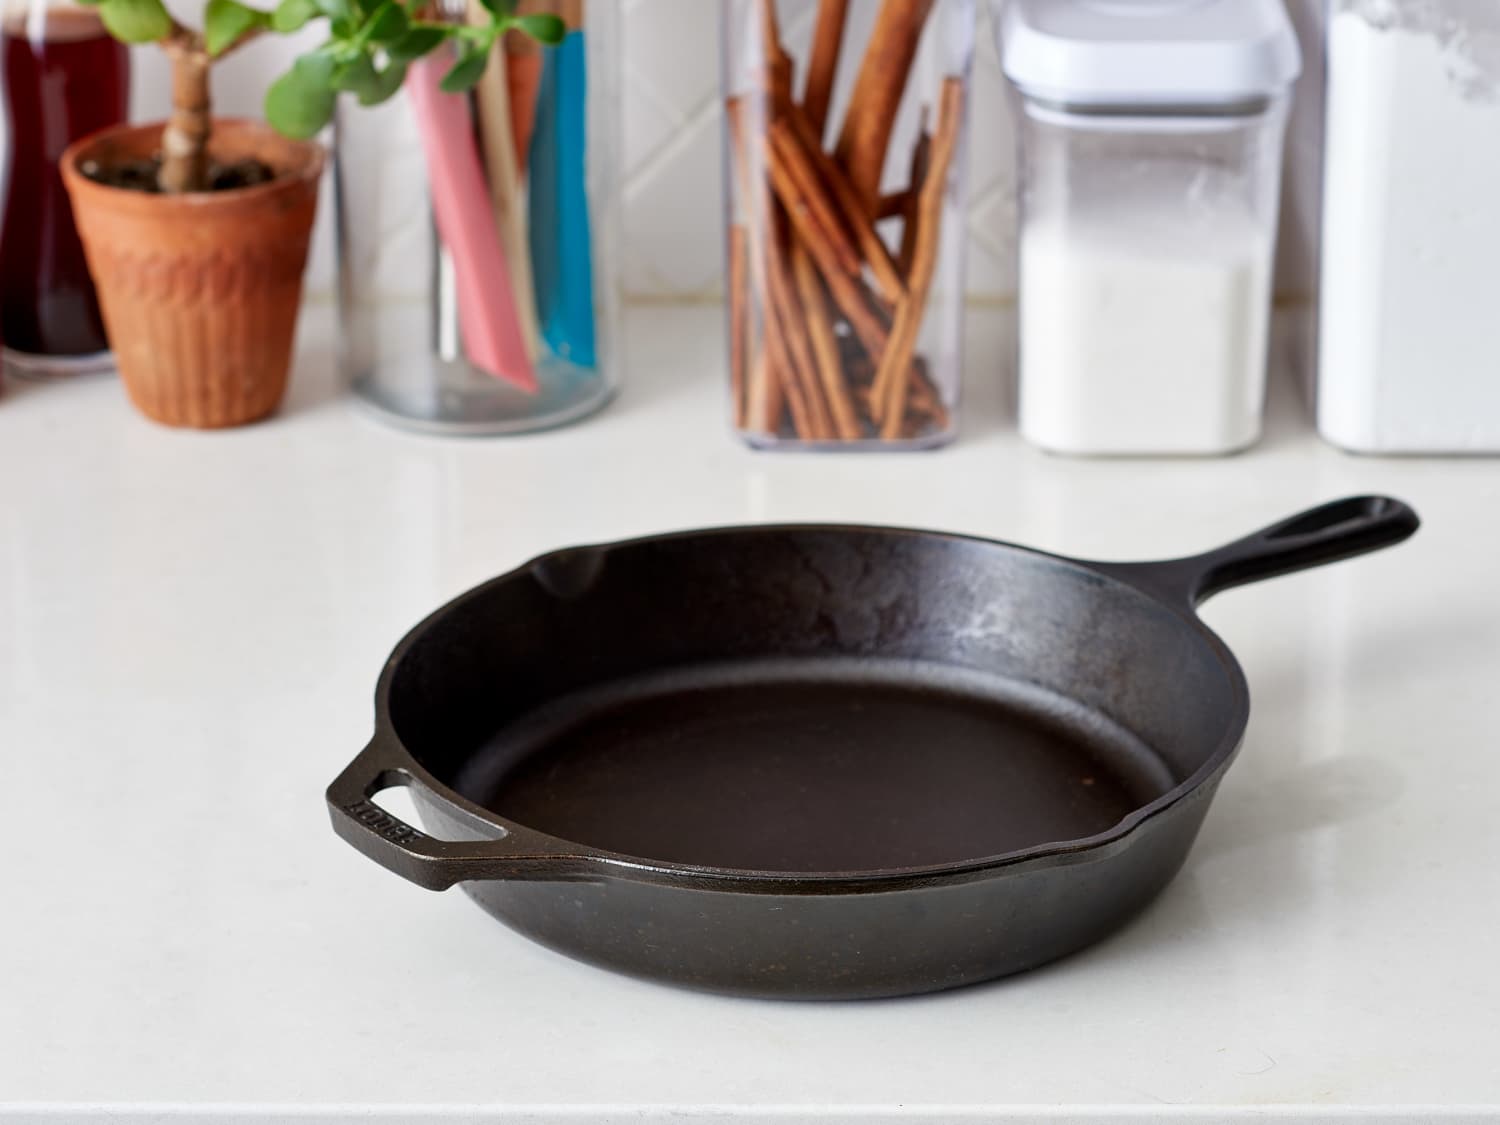 The Lodge Cast Iron Grill Pan Is 45% Off at